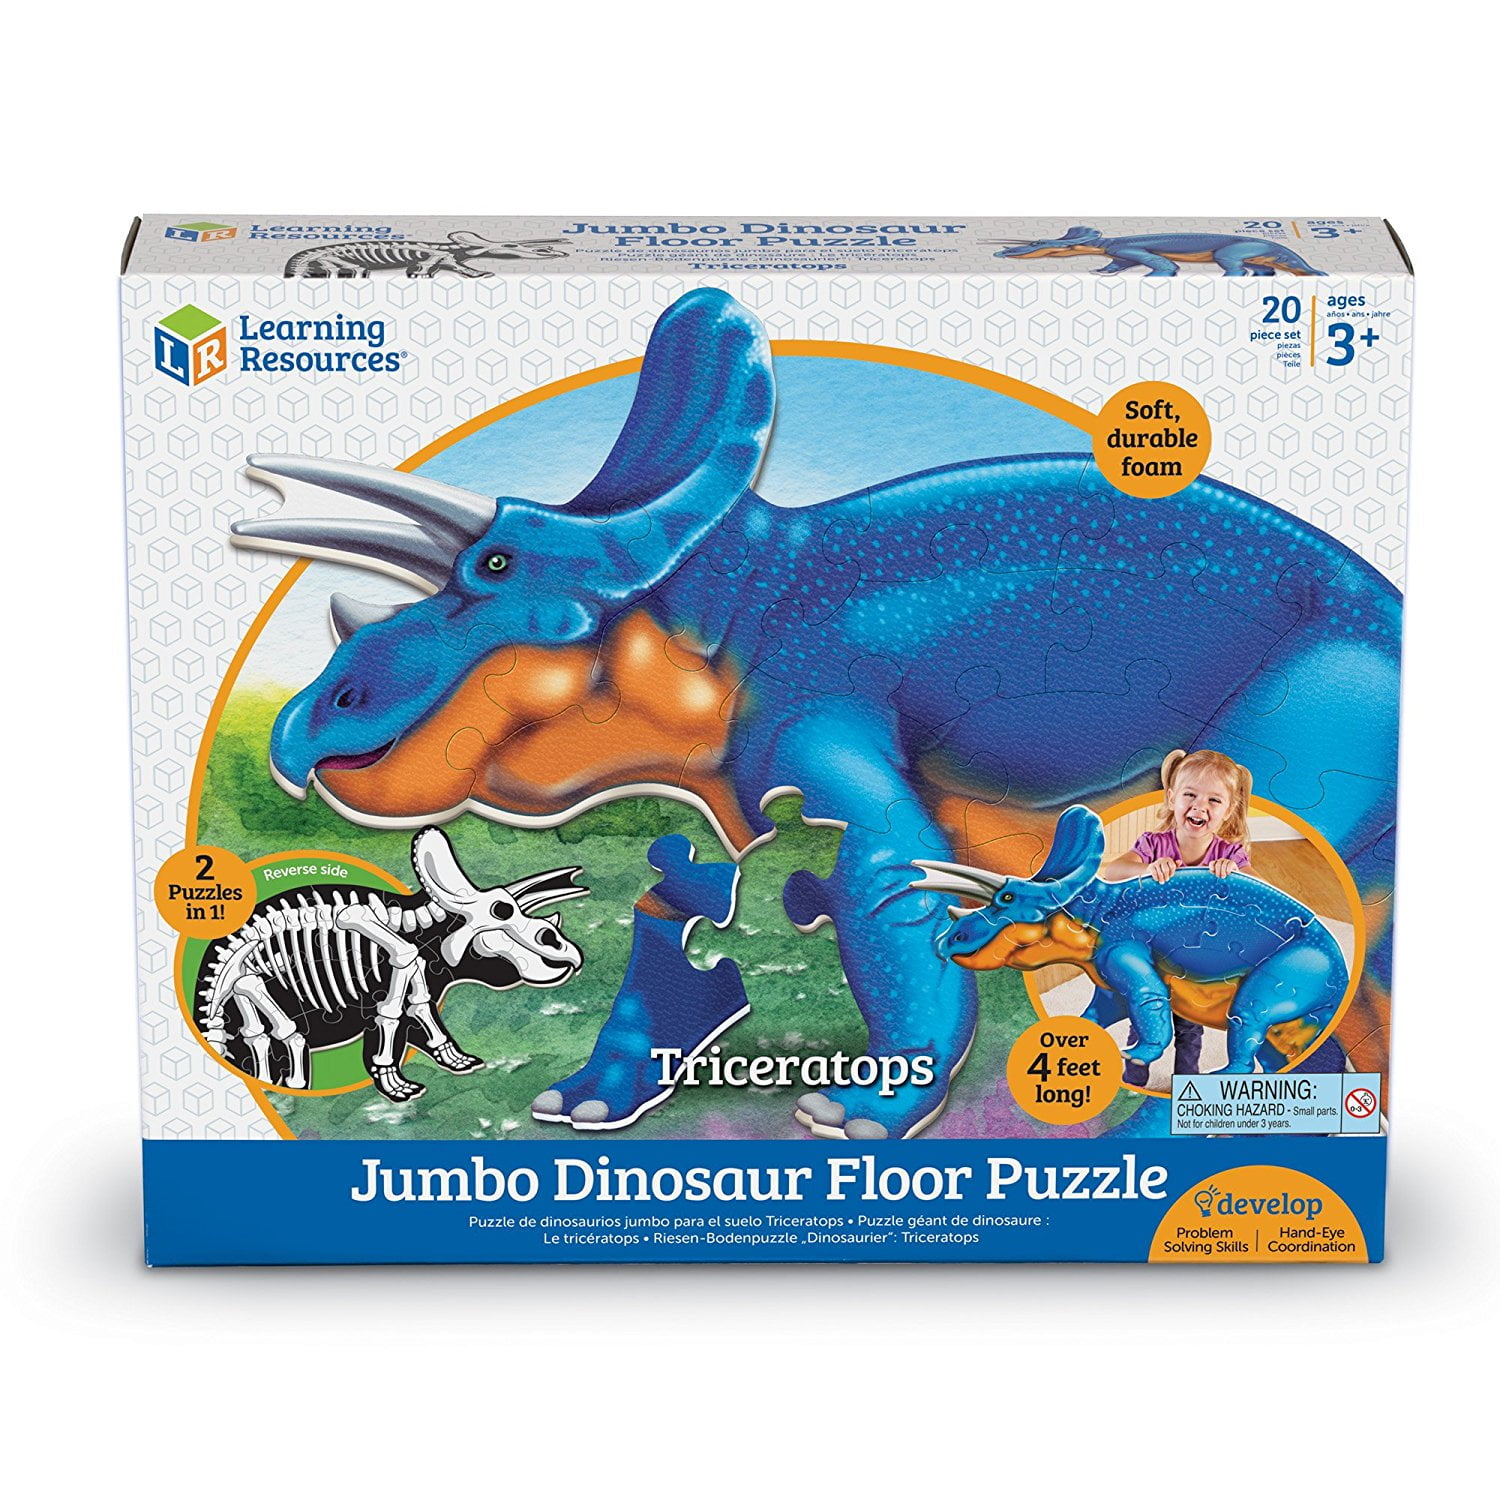 Learning Resources Jumbo Dinosaur Floor Puzzle - 20 Safe Foam Boys and Girls Ages 3+ Puzzles for Toddlers, Preschool Learning Puzzles, Dinosaur Toys, Dinosaurs for Toddlers - Walmart.com